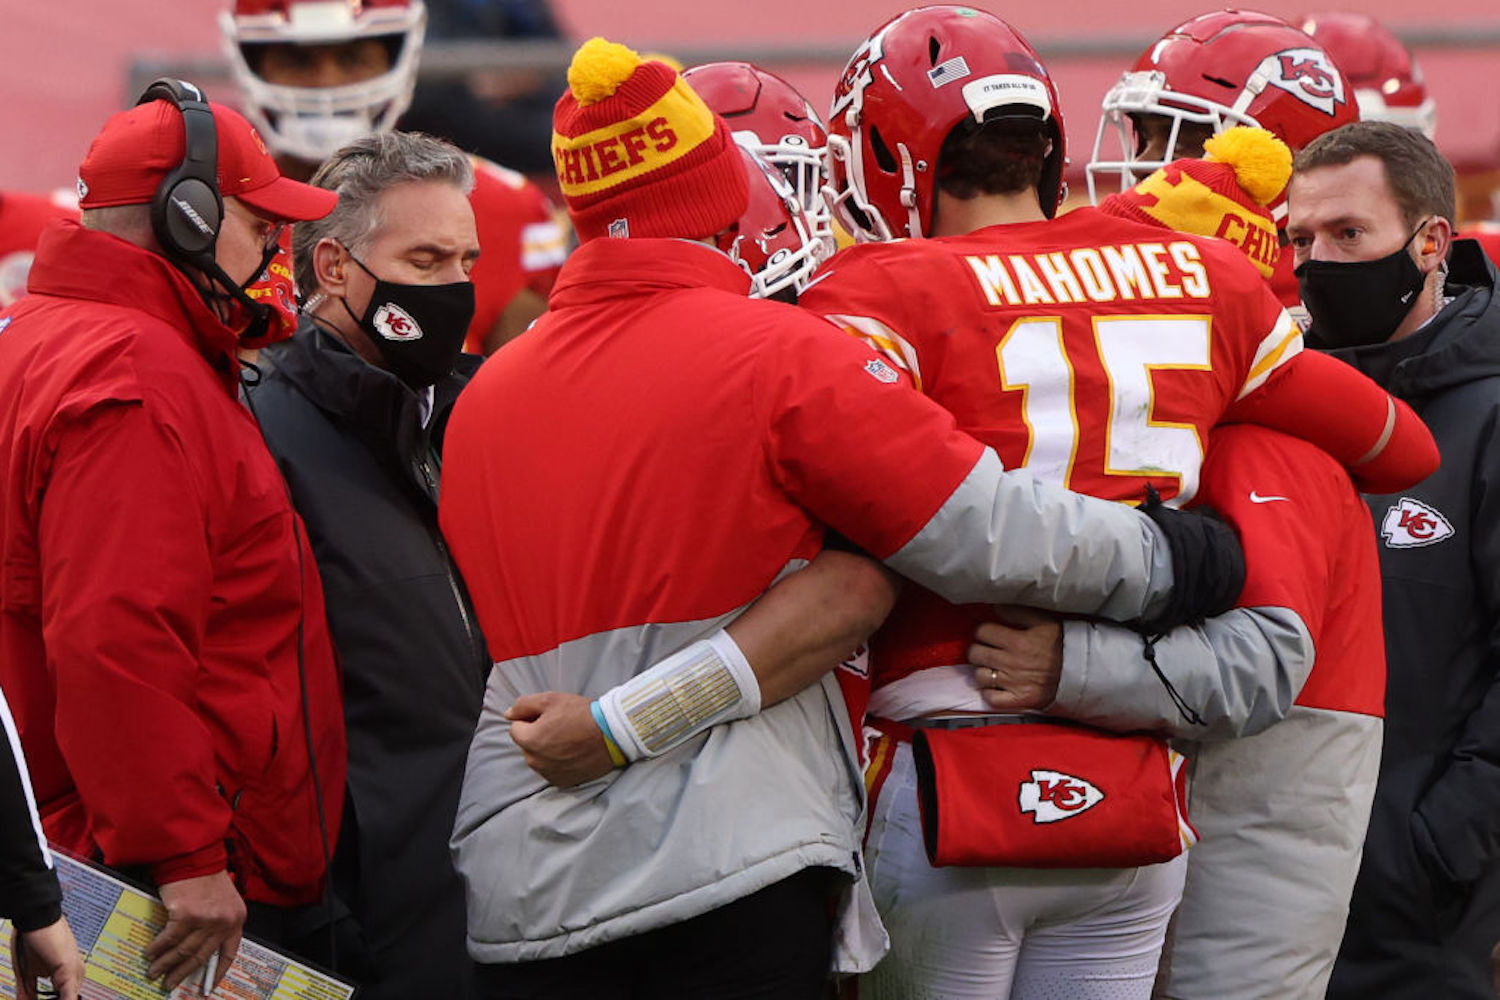 Patrick Mahomes suffered a concussion in the Chiefs' playoff game Sunday, so what will it take for him to return in time for next week?